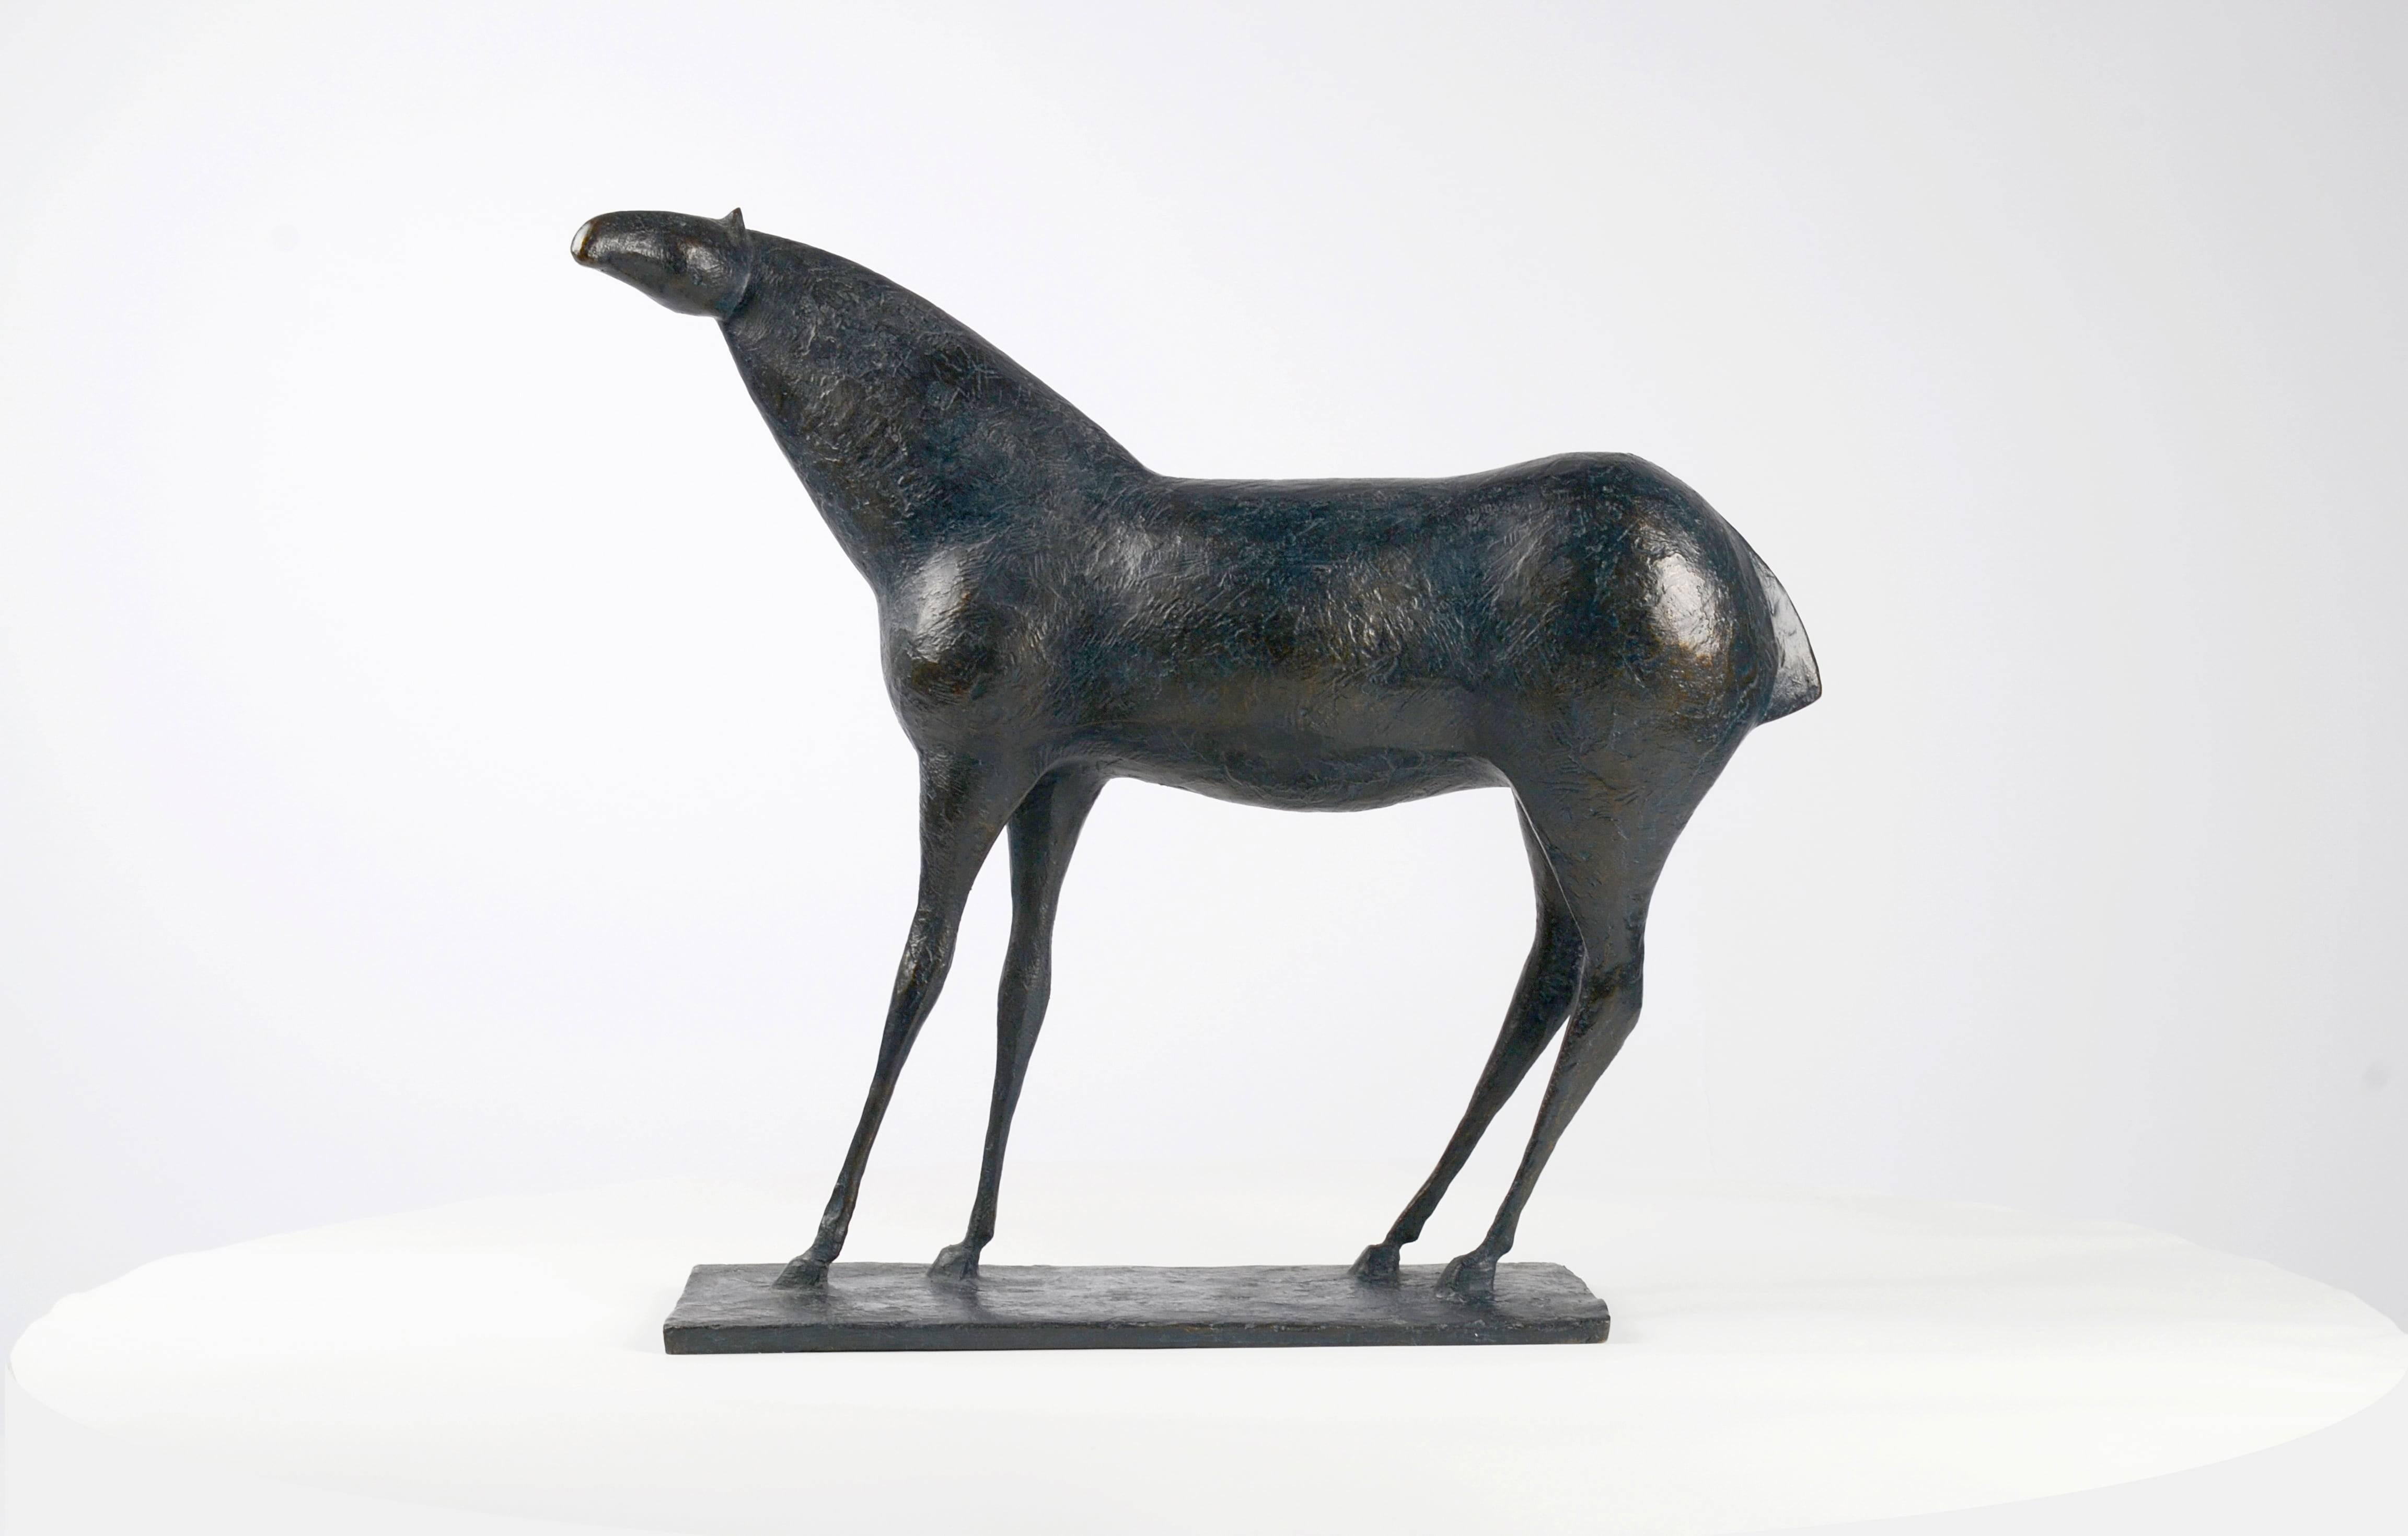 Horse XIII is a bronze sculpture by French contemporary artist Pierre Yermia, dimensions are 49 × 52 × 17 cm (19.3 × 20.5 × 6.7 in). 
The sculpture is signed and numbered, it is part of a limited edition of 8 editions + 4 artist’s proofs, and comes